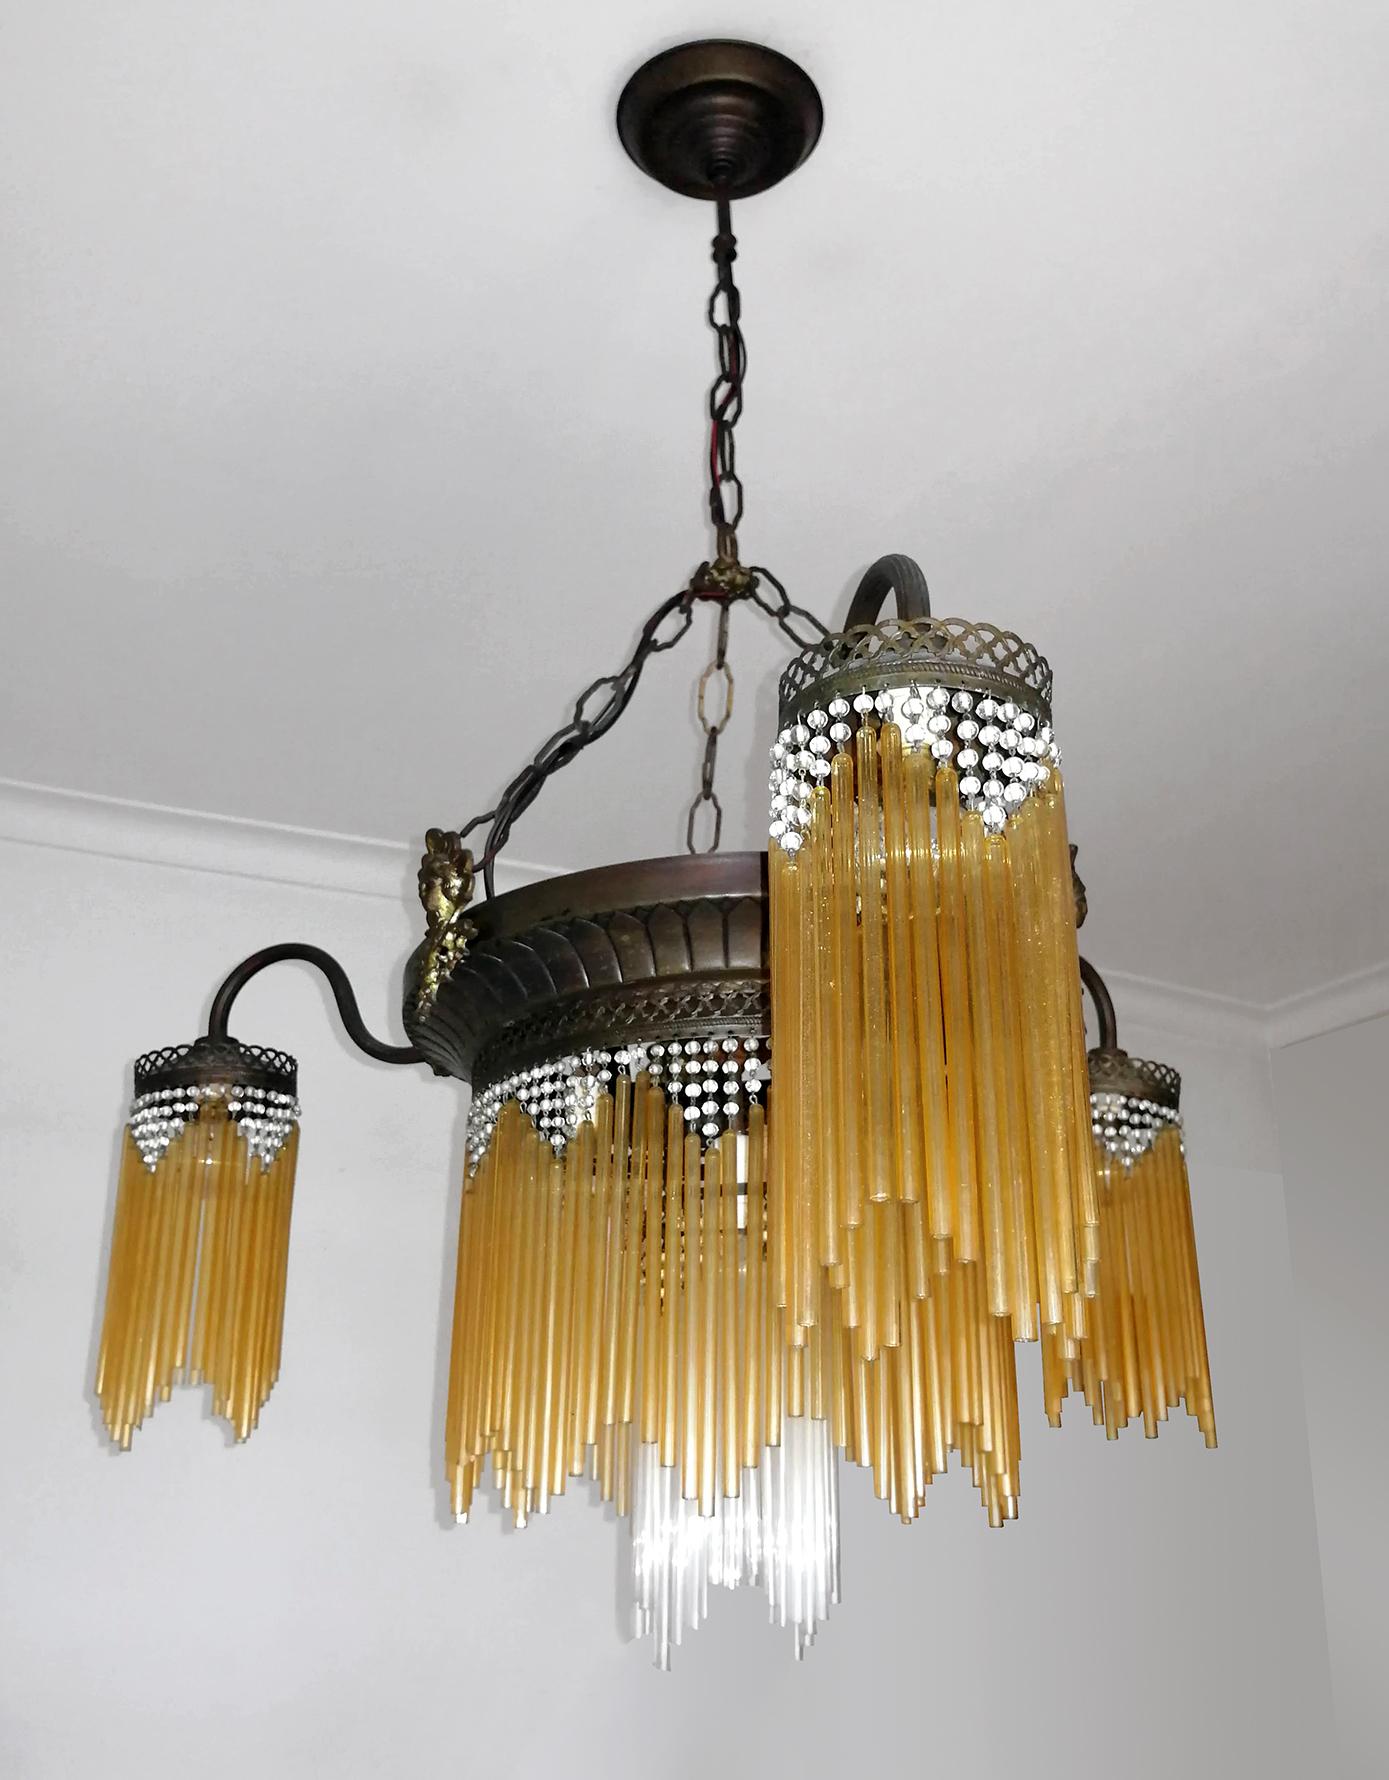 French Art Deco and Art Nouveau chandelier with glass beads and amber glass straws.
Measures:
Diameter: 28.34 in/ 72 cm
Height: 41.72 in (chain/ 9.84 in/chain)/ 106 cm (25 cm/chain)
Weight 12 lb/ 5 Kg
7-light bulbs E14/ + E27 good working